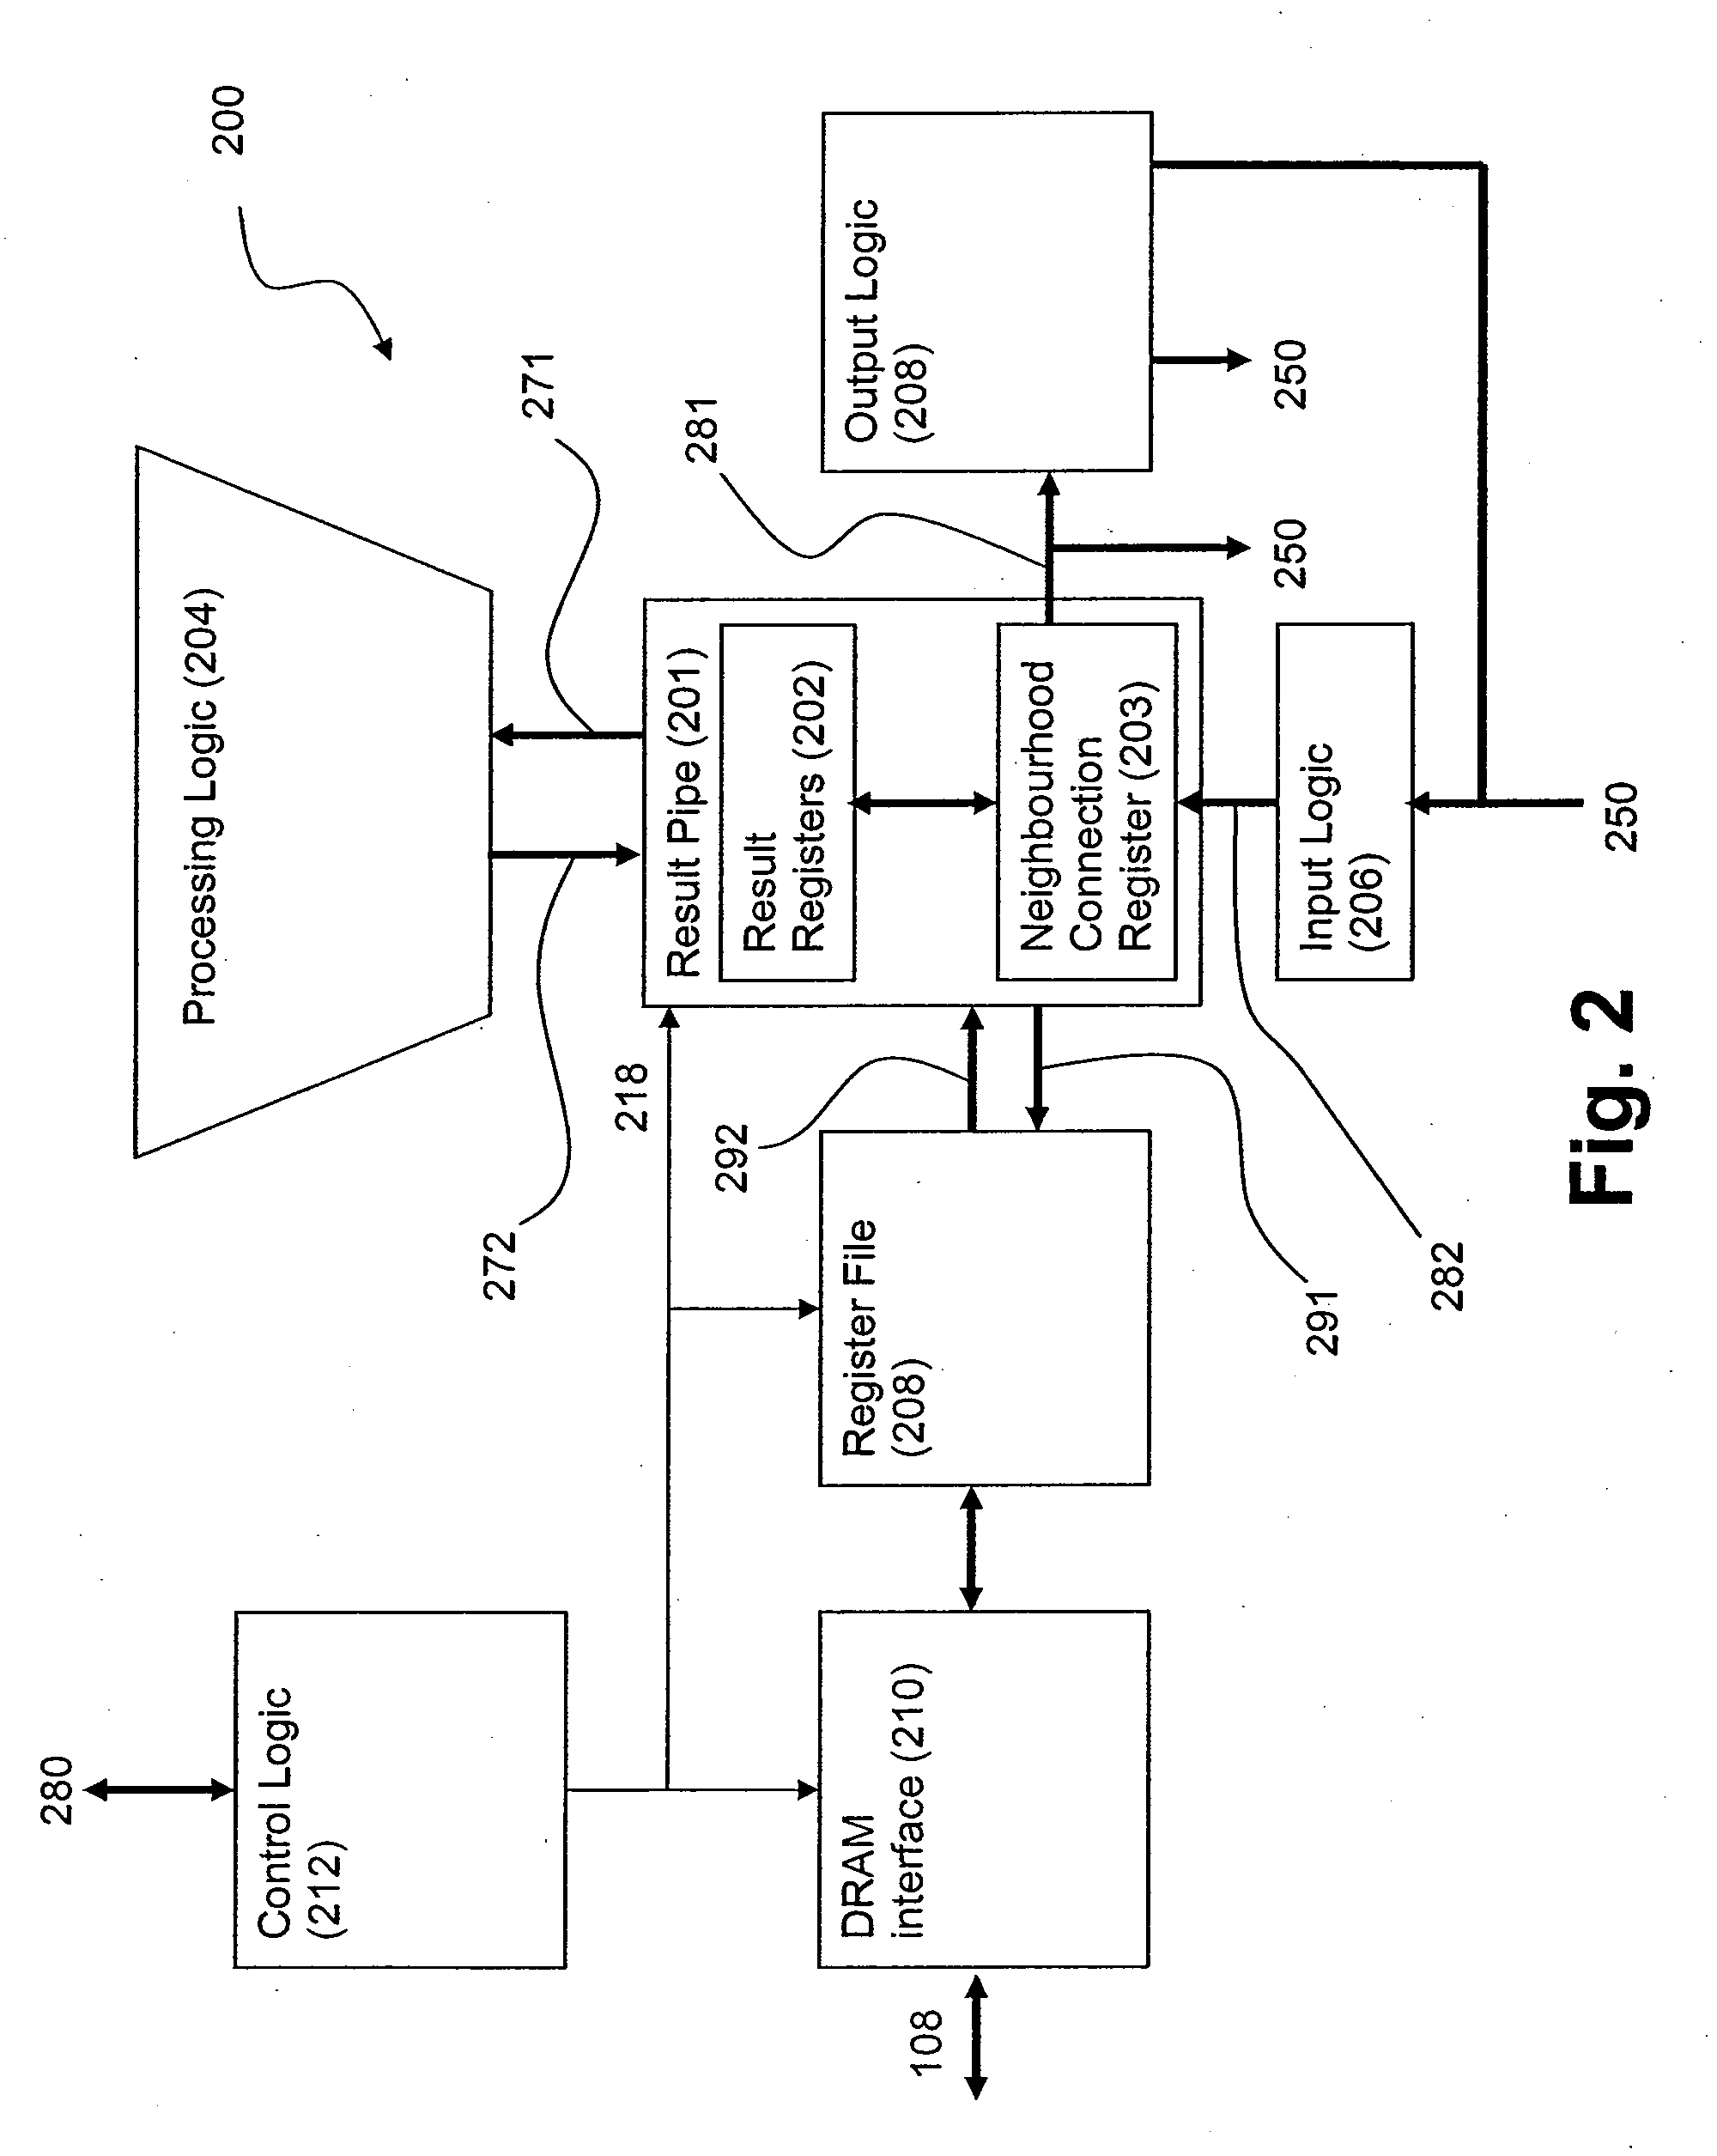 Flexible results pipeline for processing element